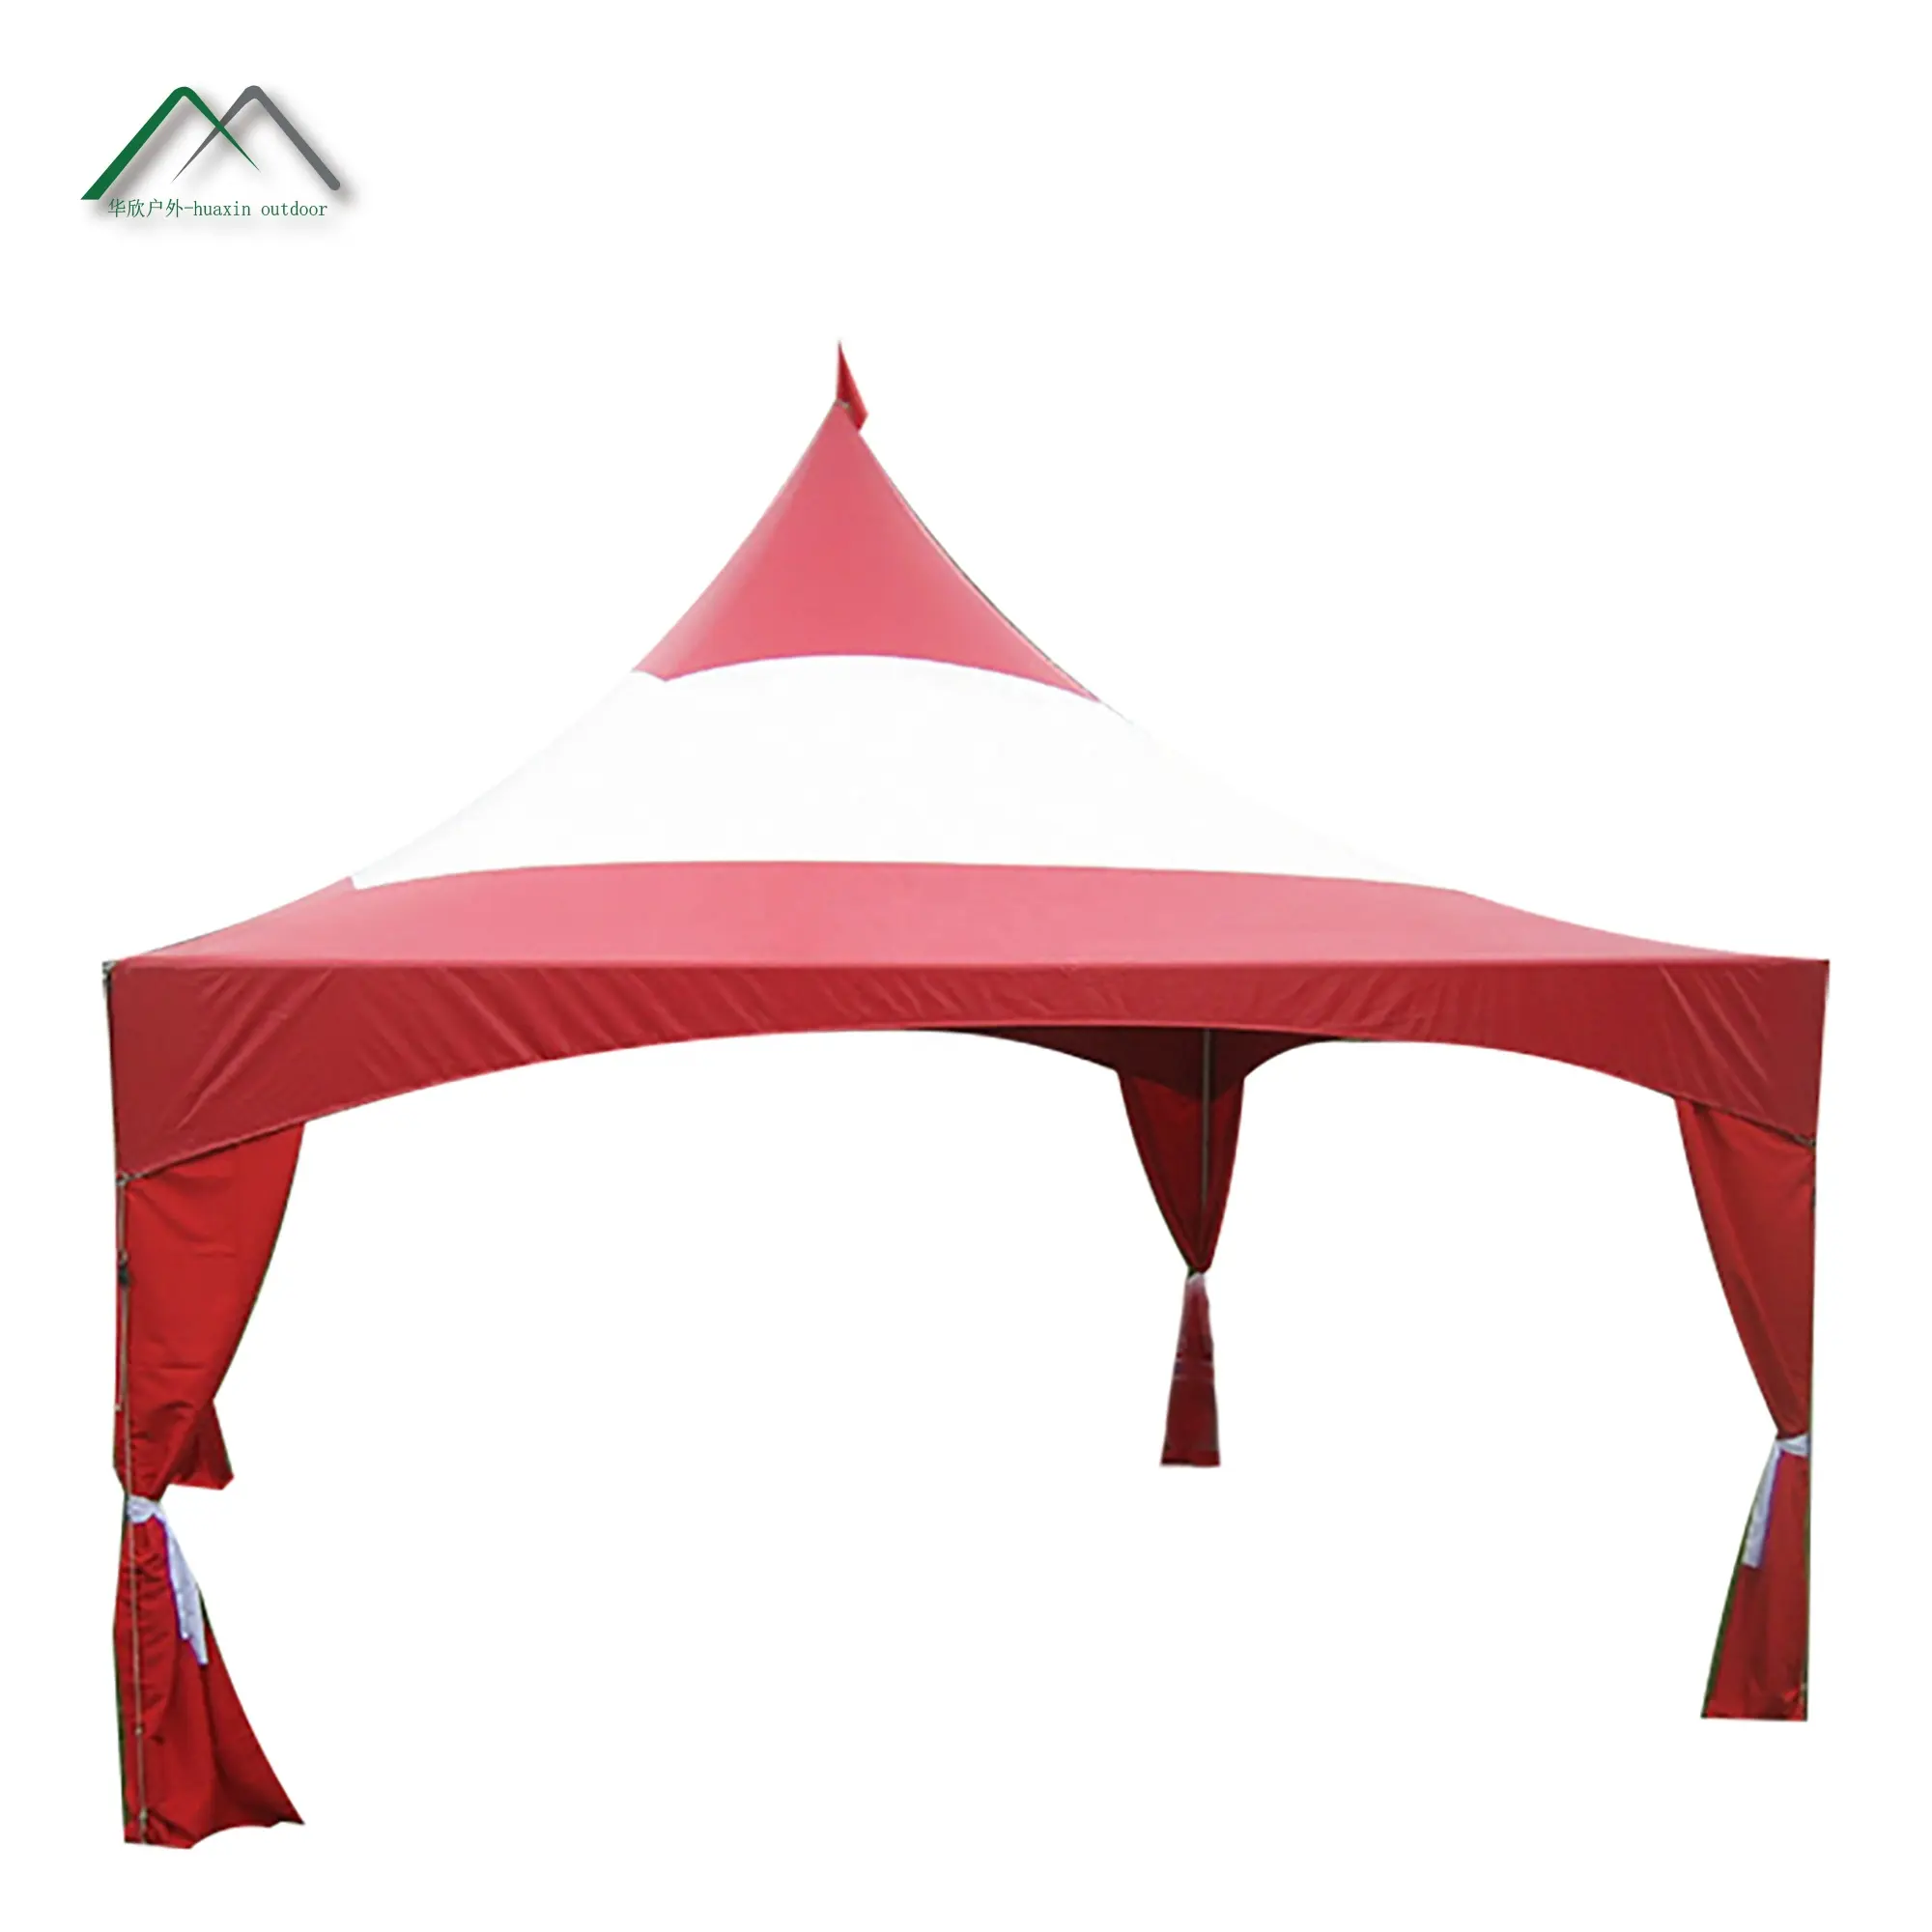 New white pvc 6 by 6 high tent pagoda marquee tent